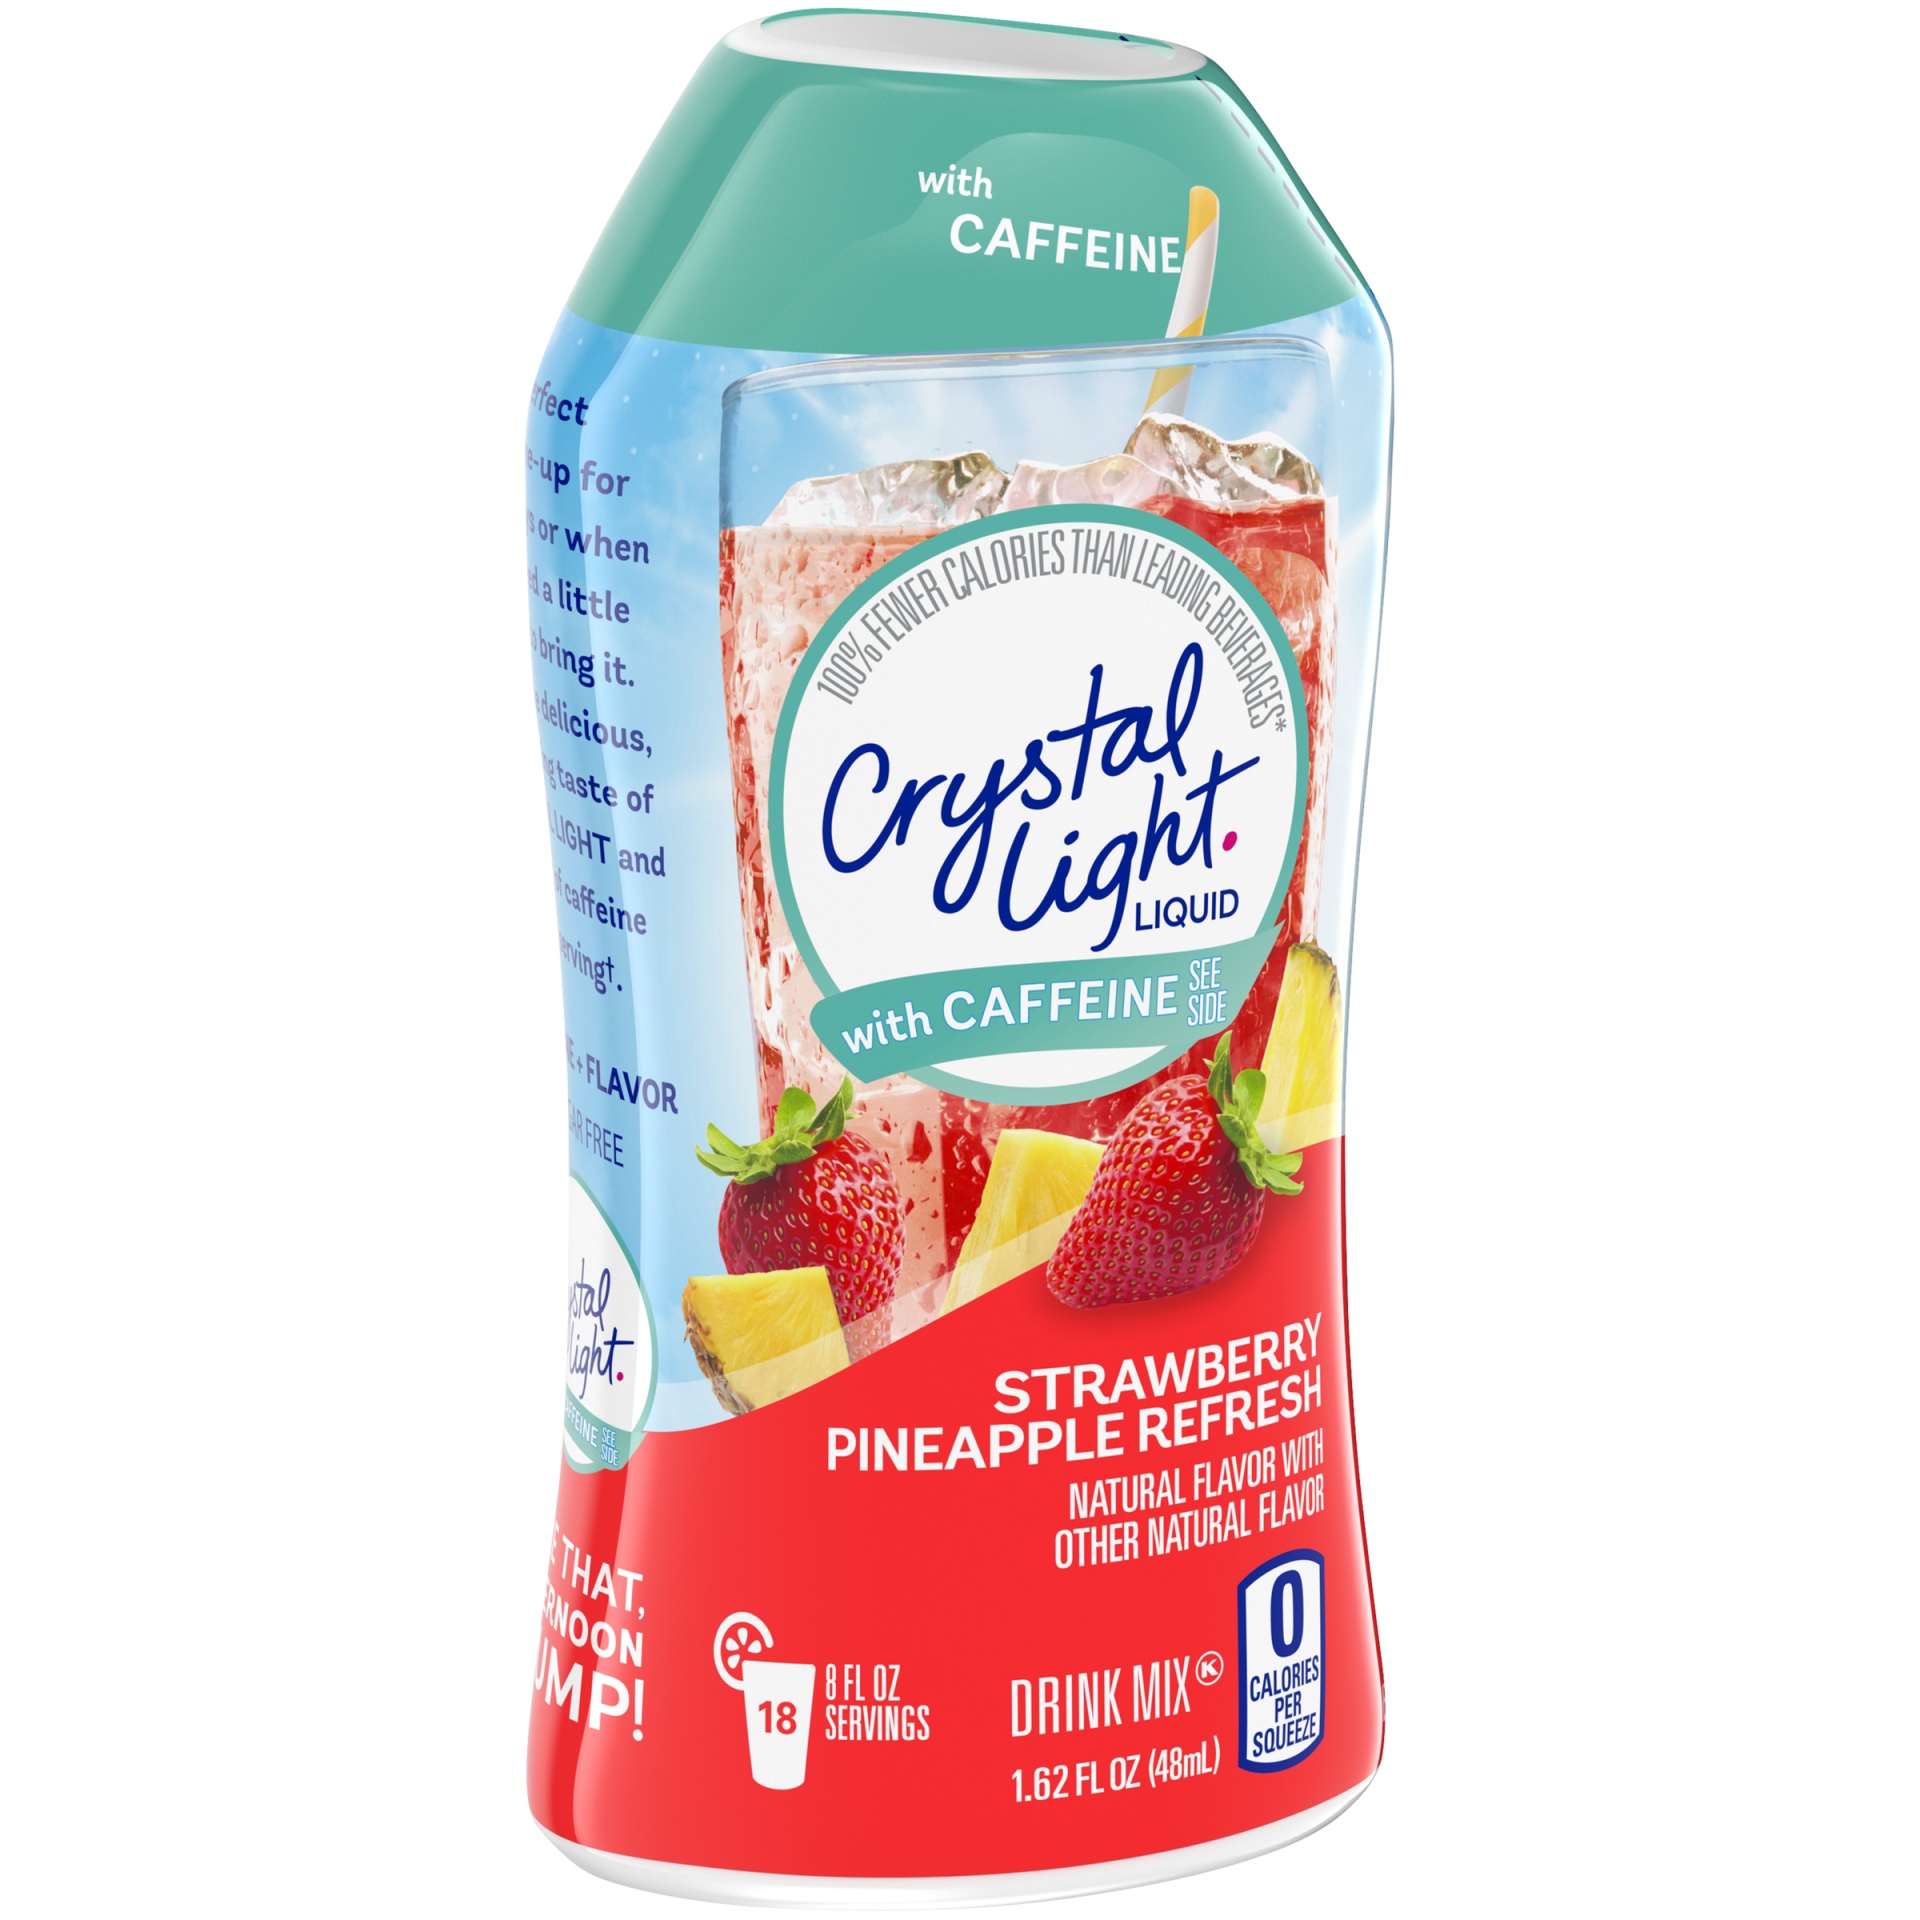 slide 7 of 11, Crystal Light Liquid Strawberry Pineapple Refresh Naturally Flavored Drink Mix with Caffeine, 1.62 oz